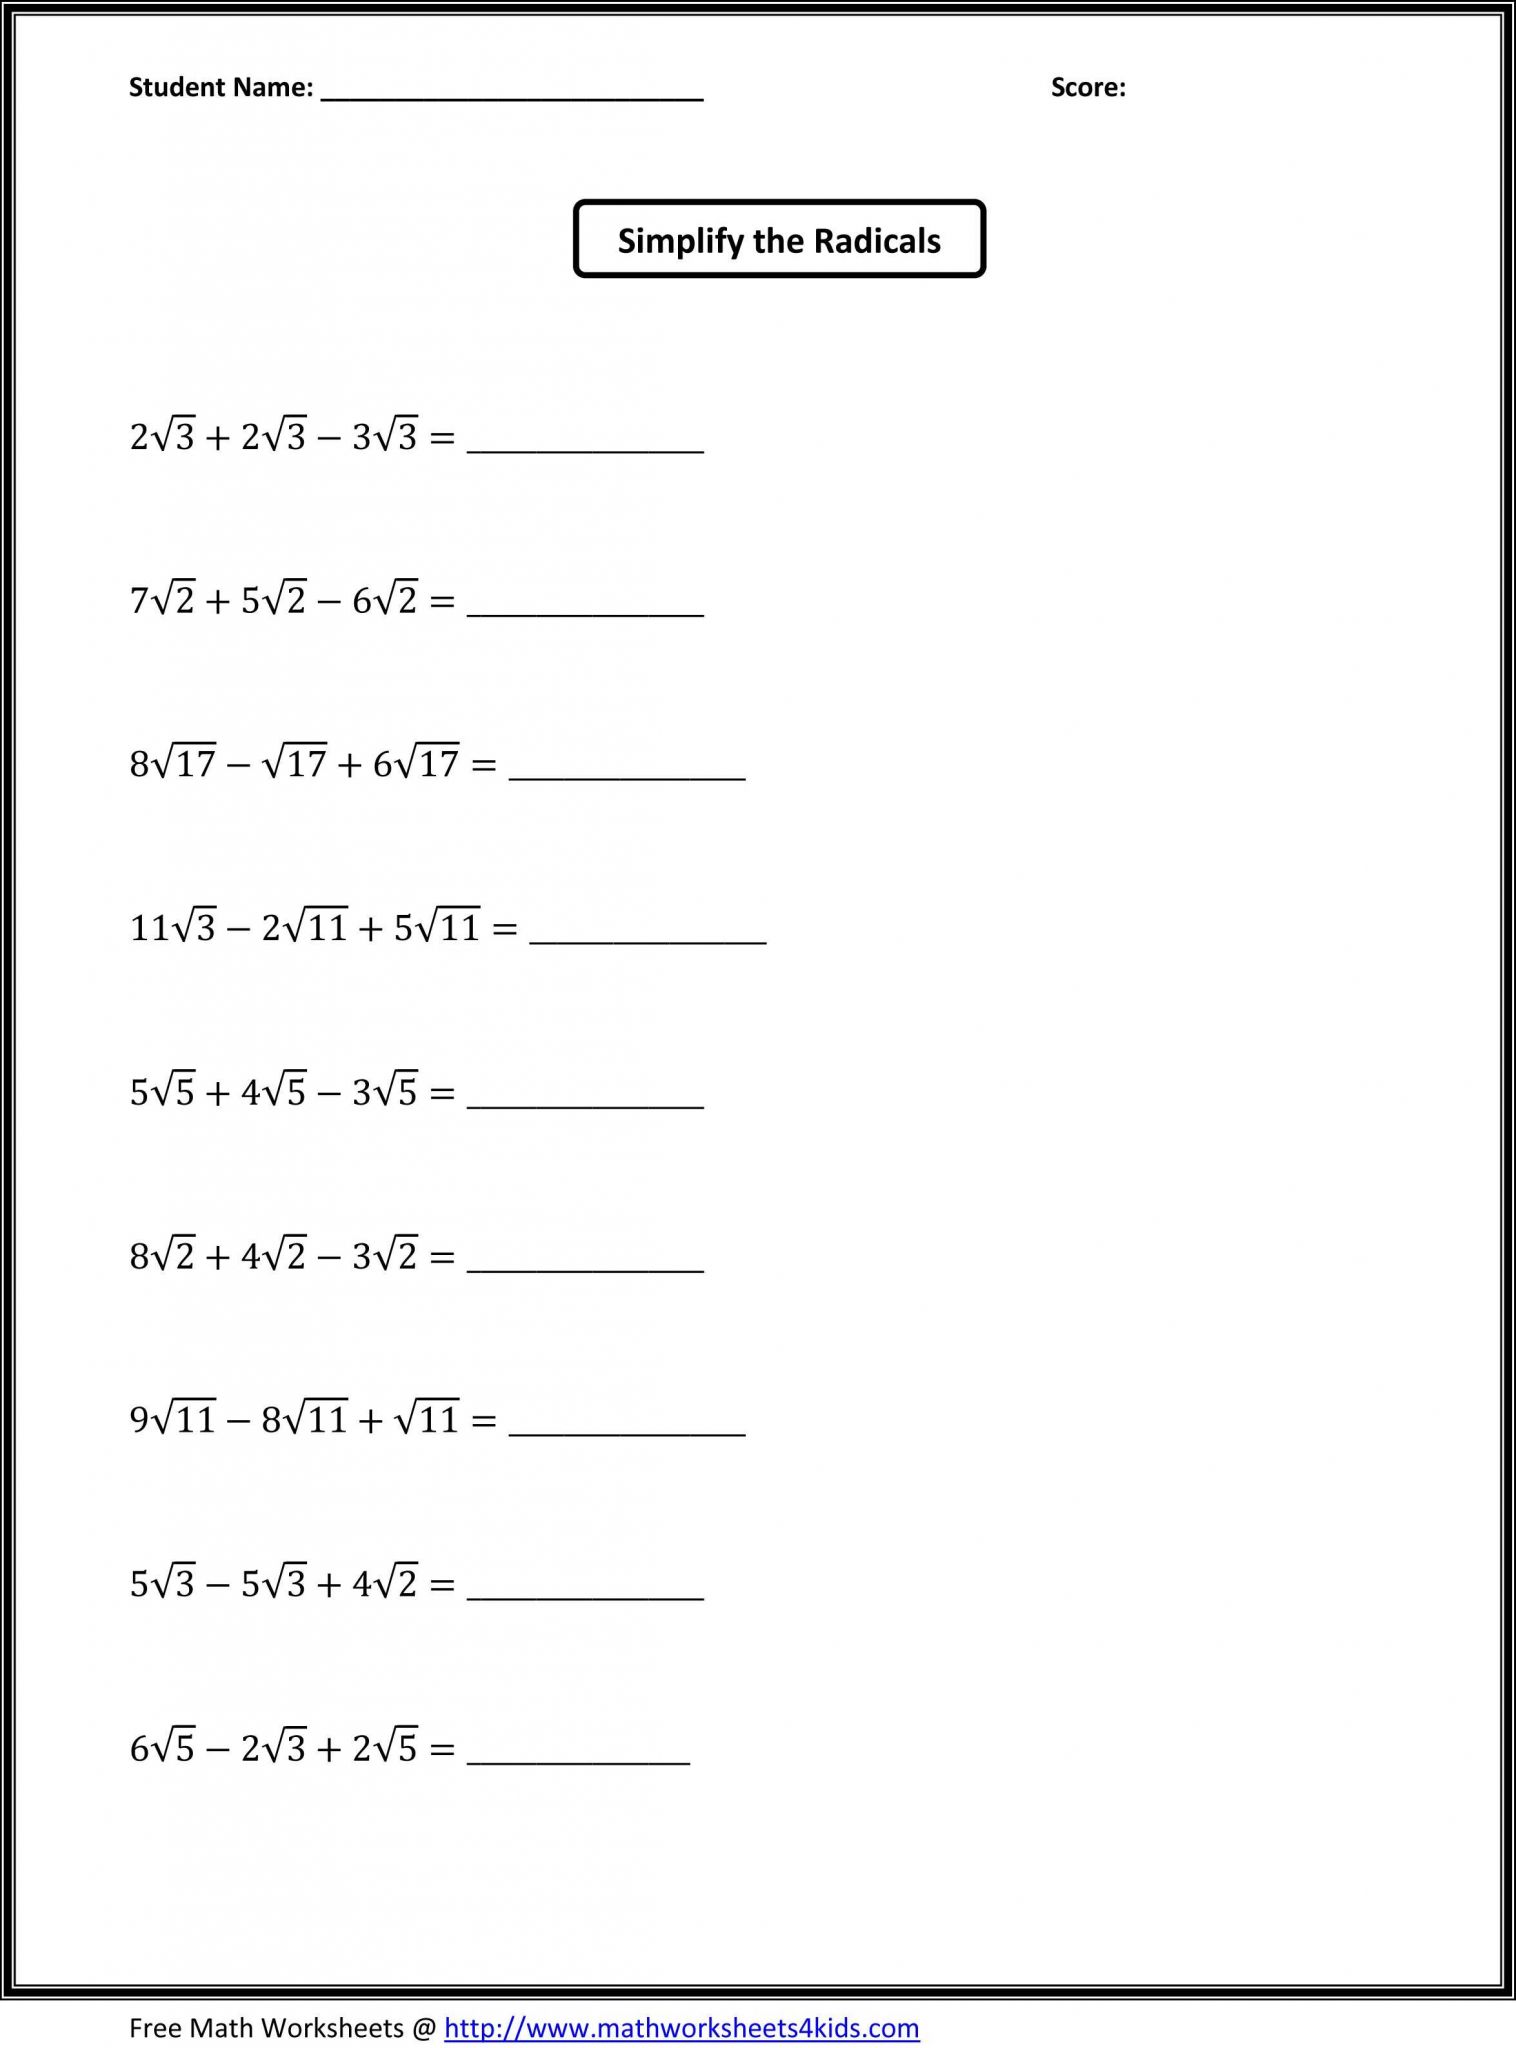 7th Grade Math Worksheets Free Printable with Answers together with 7th Grade Math Worksheets Free Printable Worksheet Math for